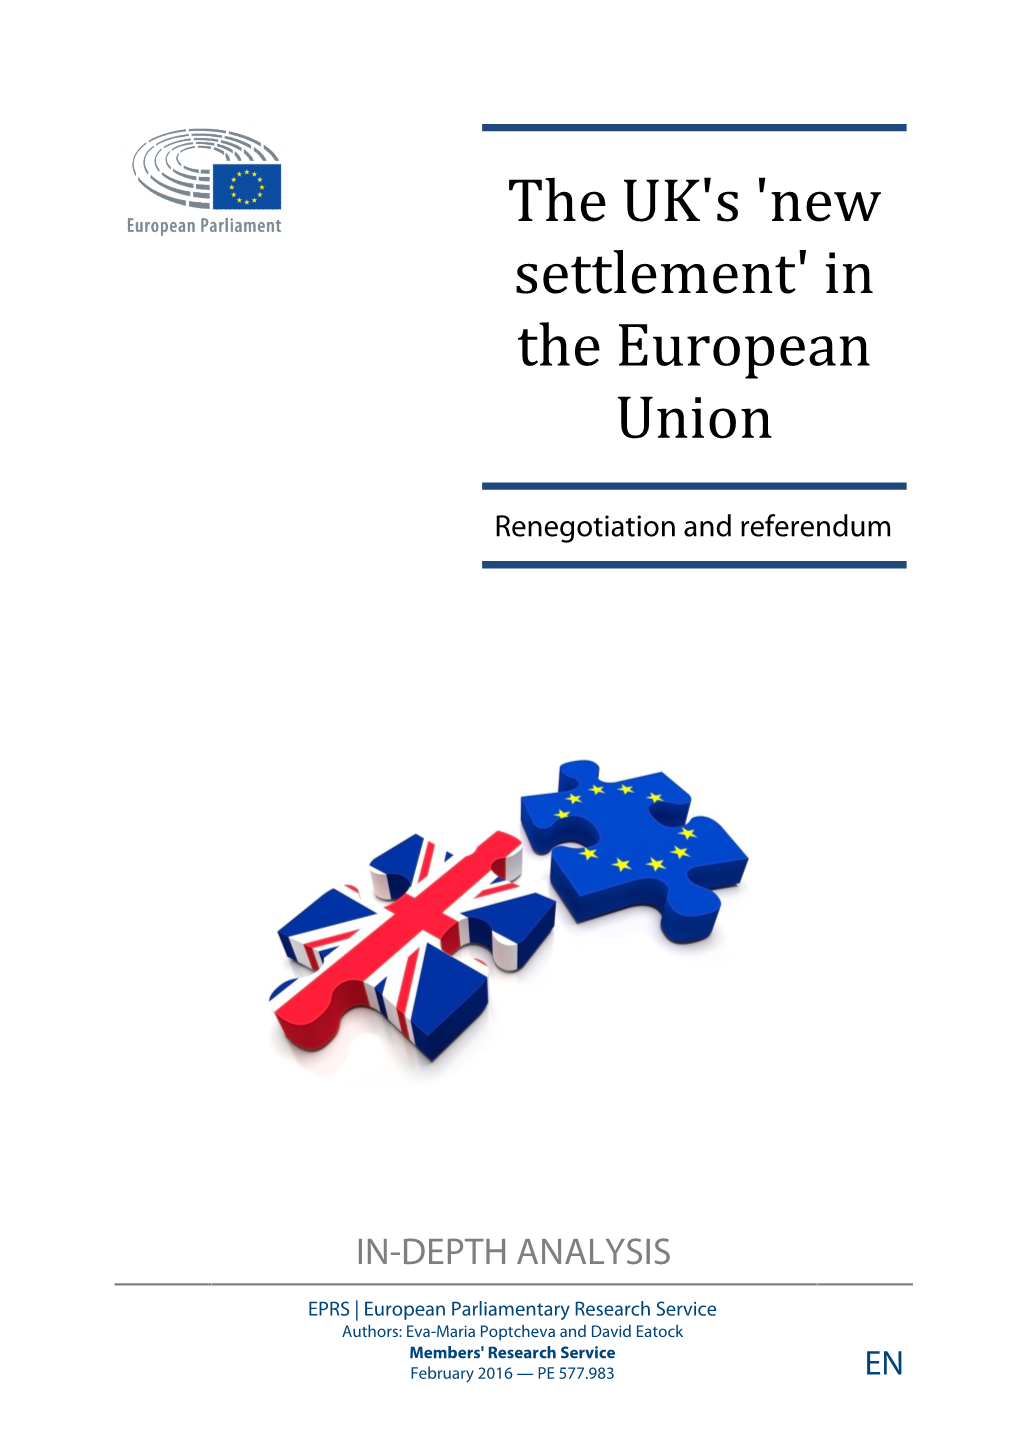 The UK's 'New Settlement' in the European Union